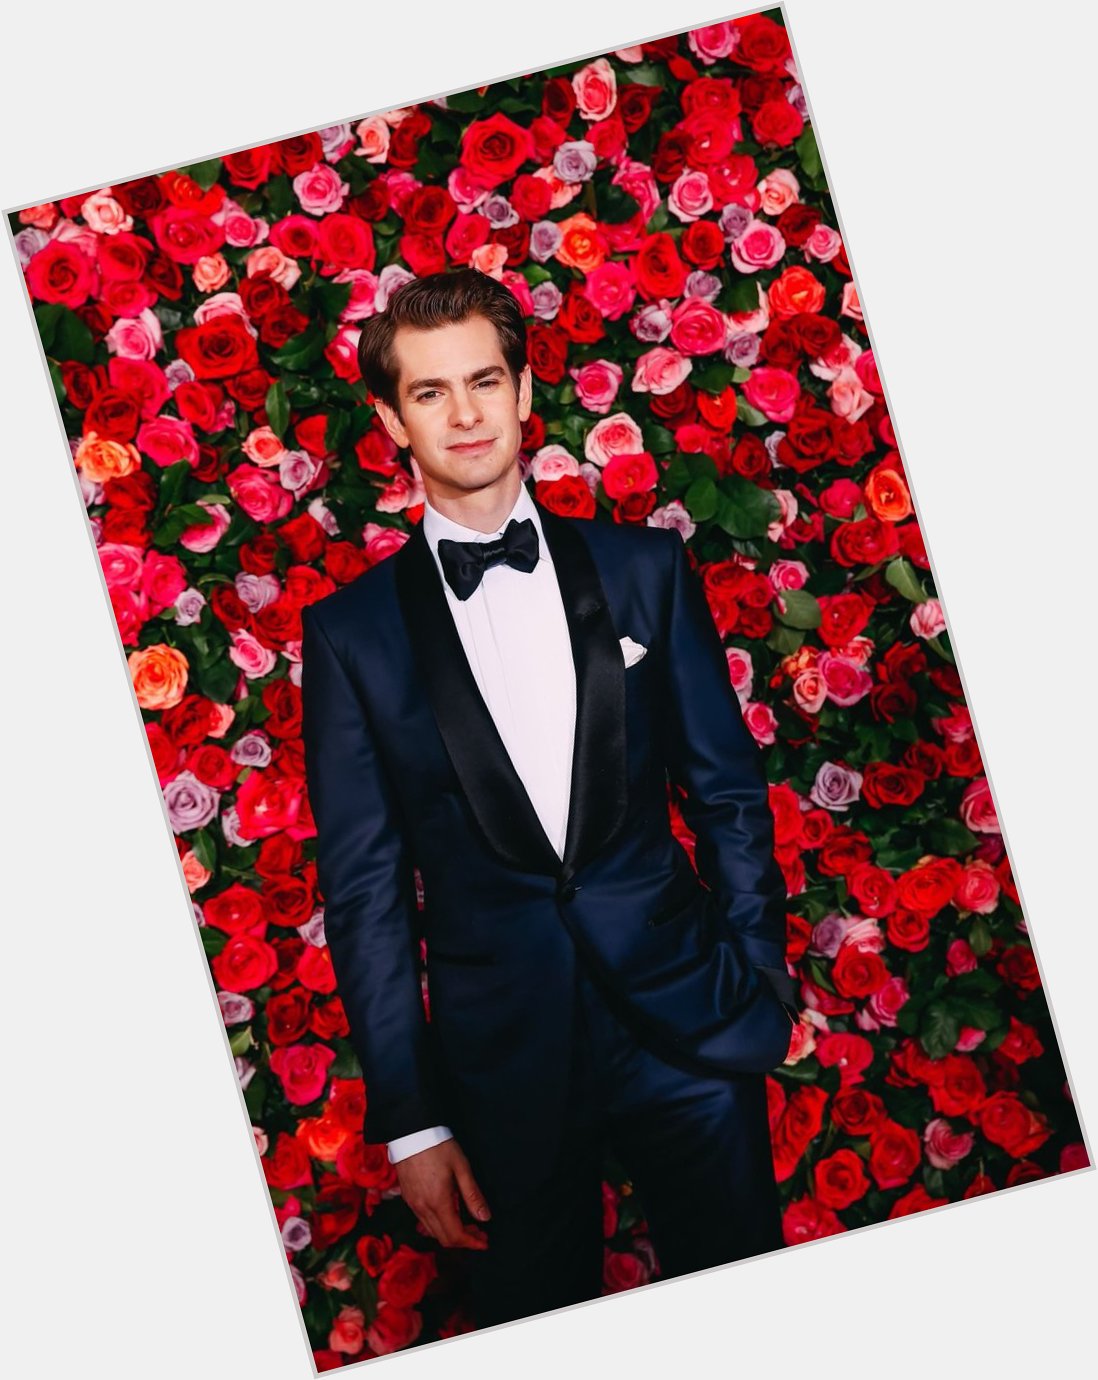 HAPPY BIRTHDAY TO THE TALENTED, TONY AWARD WINNING ANDREW GARFIELD HE DESERVES THE WHOLE WORLD AND NOTHING LESS 